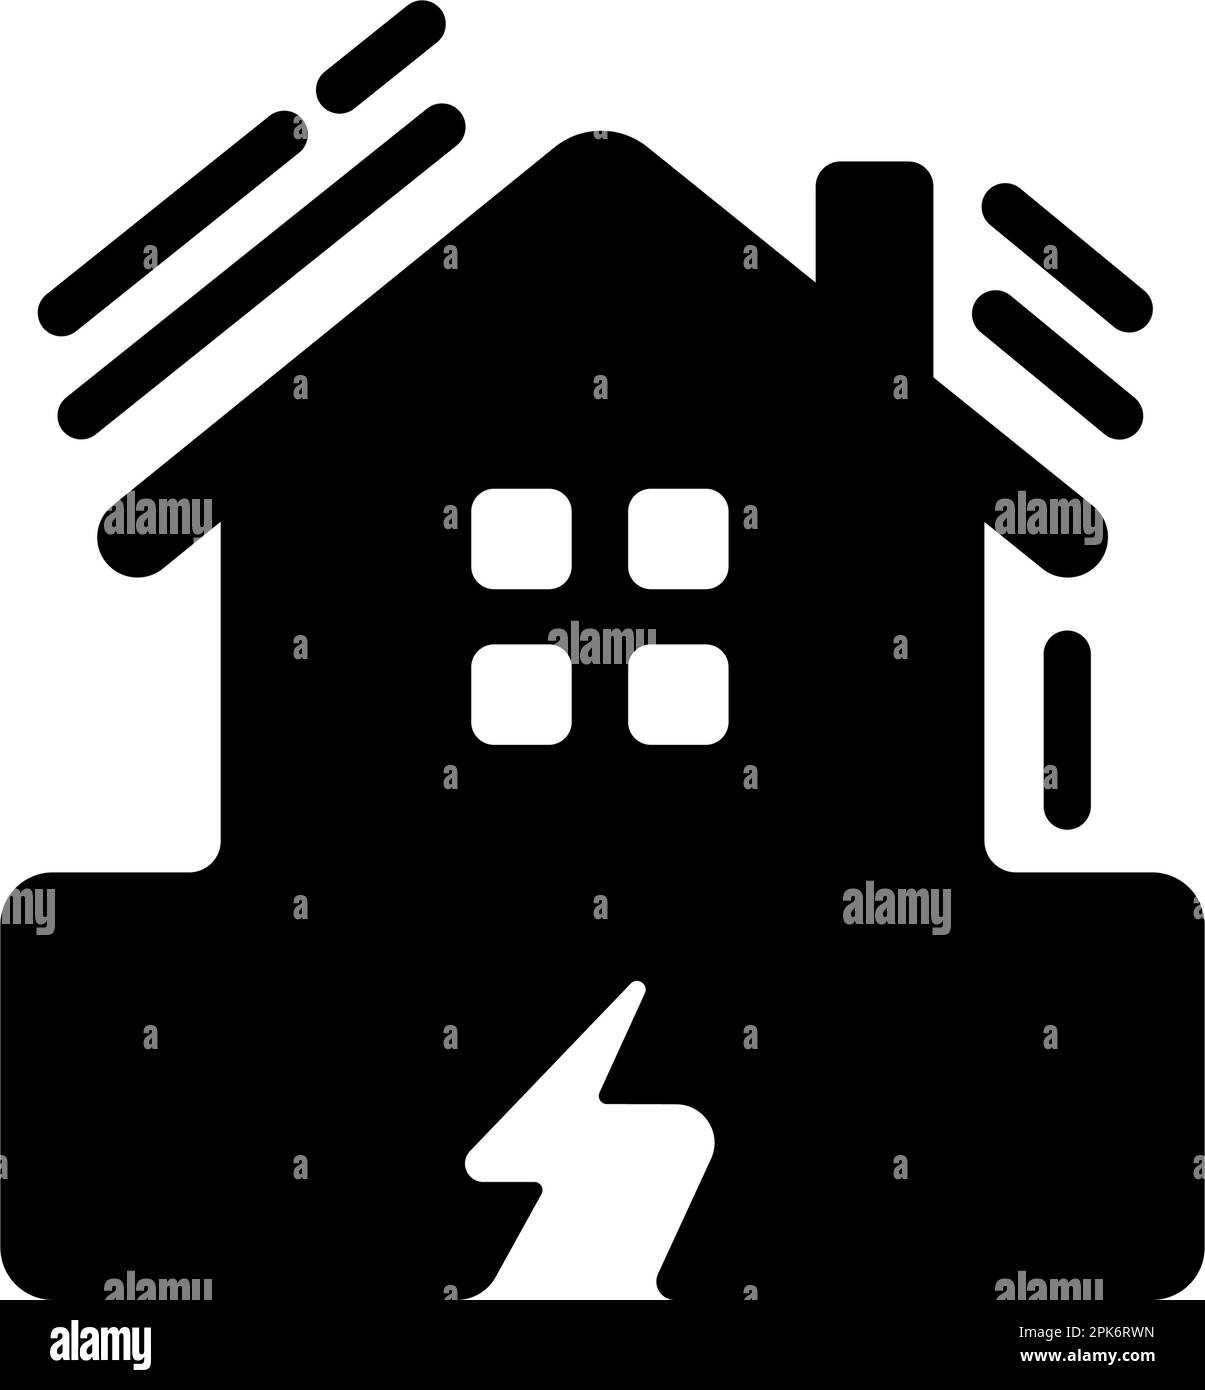 Earthquake-resistant house vector icon illustration Stock Vector